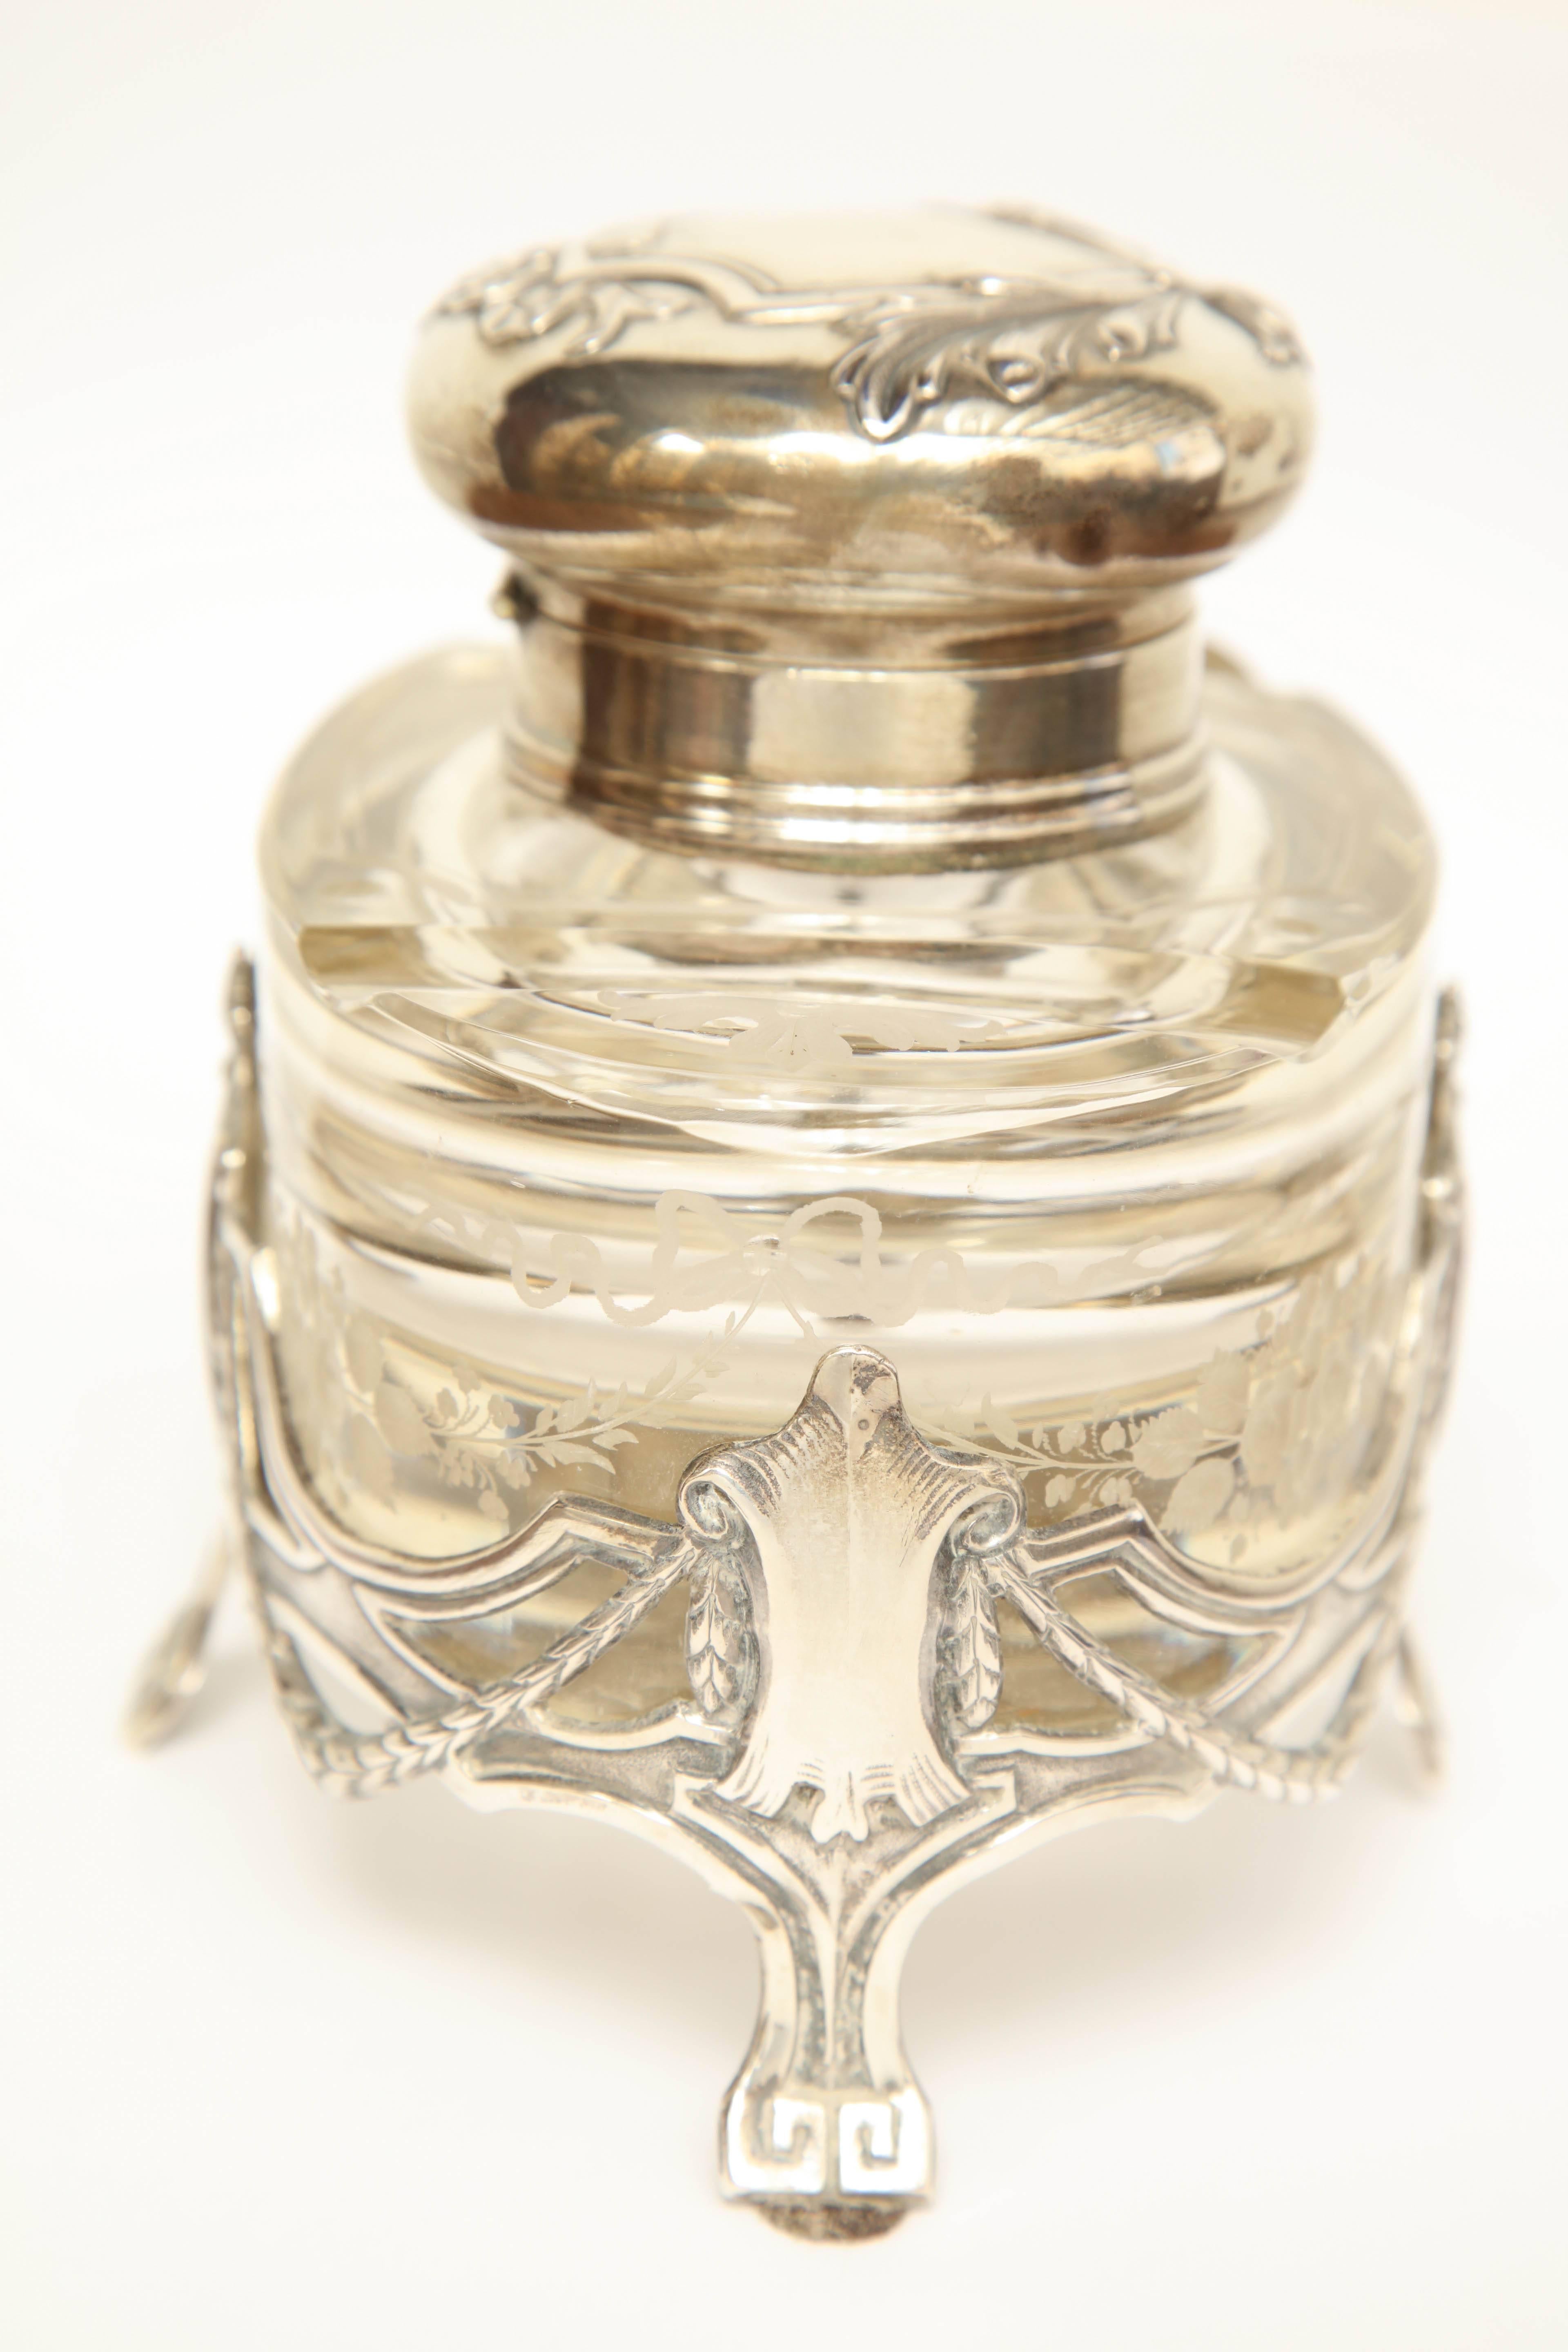 Early 20th Century Art Nouveau German Silver and Glass Inkwell For Sale 1